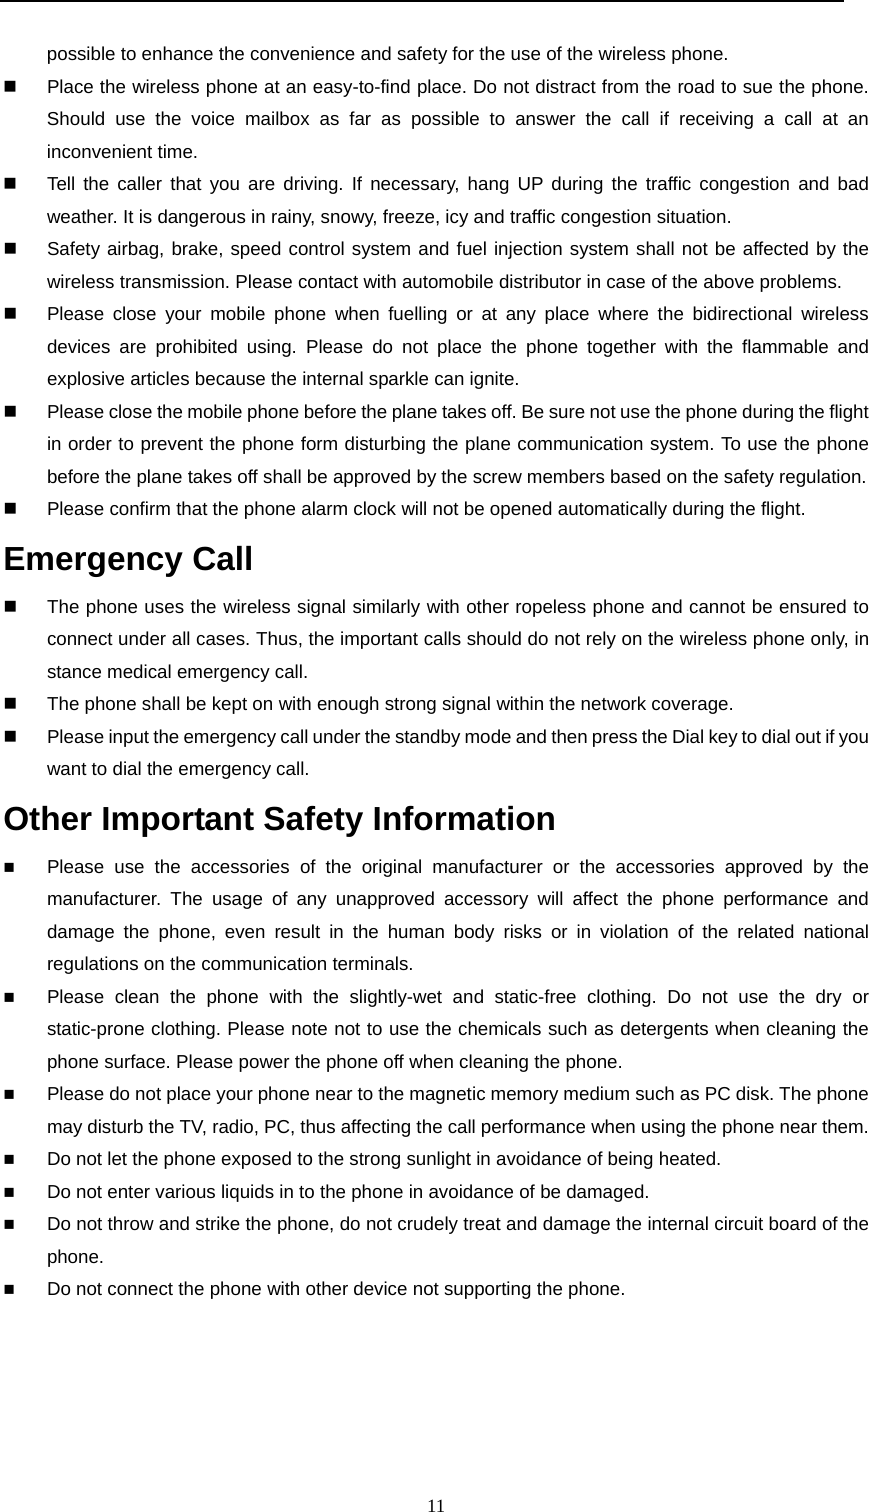  11  possible to enhance the convenience and safety for the use of the wireless phone.     Place the wireless phone at an easy-to-find place. Do not distract from the road to sue the phone. Should use the voice mailbox as far as possible to answer the call if receiving a call at an inconvenient time.   Tell the caller that you are driving. If necessary, hang UP during the traffic congestion and bad weather. It is dangerous in rainy, snowy, freeze, icy and traffic congestion situation.     Safety airbag, brake, speed control system and fuel injection system shall not be affected by the wireless transmission. Please contact with automobile distributor in case of the above problems.    Please close your mobile phone when fuelling or at any place where the bidirectional wireless devices are prohibited using. Please do not place the phone together with the flammable and explosive articles because the internal sparkle can ignite.   Please close the mobile phone before the plane takes off. Be sure not use the phone during the flight in order to prevent the phone form disturbing the plane communication system. To use the phone before the plane takes off shall be approved by the screw members based on the safety regulation.    Please confirm that the phone alarm clock will not be opened automatically during the flight.   Emergency Call                                                                        The phone uses the wireless signal similarly with other ropeless phone and cannot be ensured to connect under all cases. Thus, the important calls should do not rely on the wireless phone only, in stance medical emergency call.   The phone shall be kept on with enough strong signal within the network coverage.   Please input the emergency call under the standby mode and then press the Dial key to dial out if you want to dial the emergency call.   Other Important Safety Information                                                       Please use the accessories of the original manufacturer or the accessories approved by the manufacturer. The usage of any unapproved accessory will affect the phone performance and damage the phone, even result in the human body risks or in violation of the related national regulations on the communication terminals.   Please clean the phone with the slightly-wet and static-free clothing. Do not use the dry or static-prone clothing. Please note not to use the chemicals such as detergents when cleaning the phone surface. Please power the phone off when cleaning the phone.  Please do not place your phone near to the magnetic memory medium such as PC disk. The phone may disturb the TV, radio, PC, thus affecting the call performance when using the phone near them.  Do not let the phone exposed to the strong sunlight in avoidance of being heated.  Do not enter various liquids in to the phone in avoidance of be damaged.  Do not throw and strike the phone, do not crudely treat and damage the internal circuit board of the phone.  Do not connect the phone with other device not supporting the phone.     